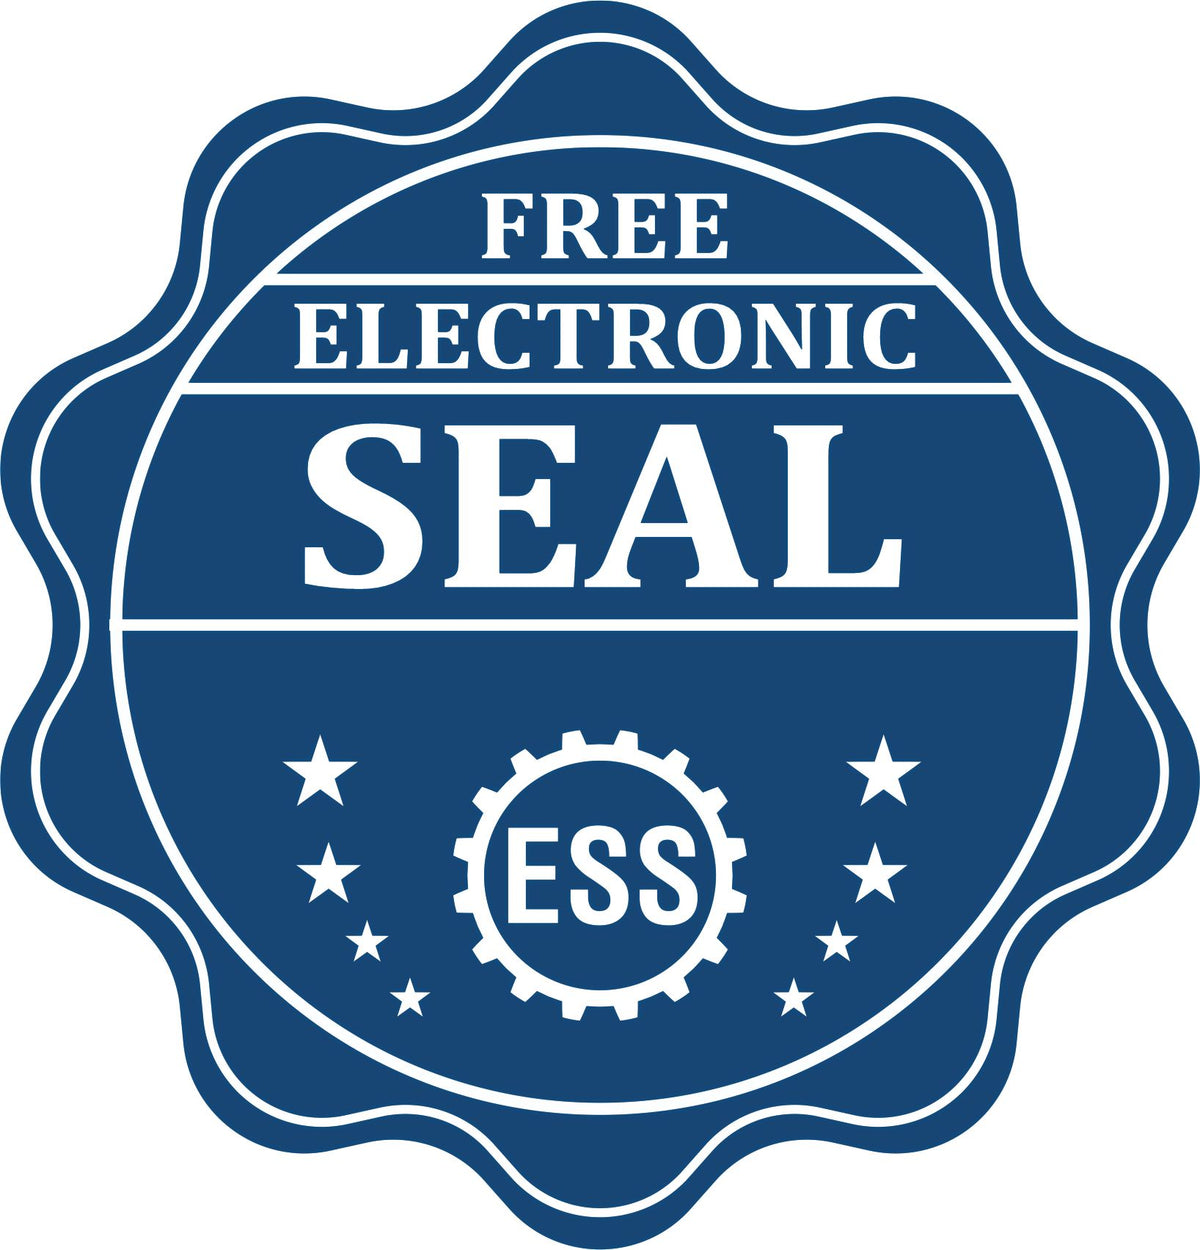 A badge showing a free electronic seal for the Hybrid Nevada Land Surveyor Seal with stars and the ESS gear on the emblem.